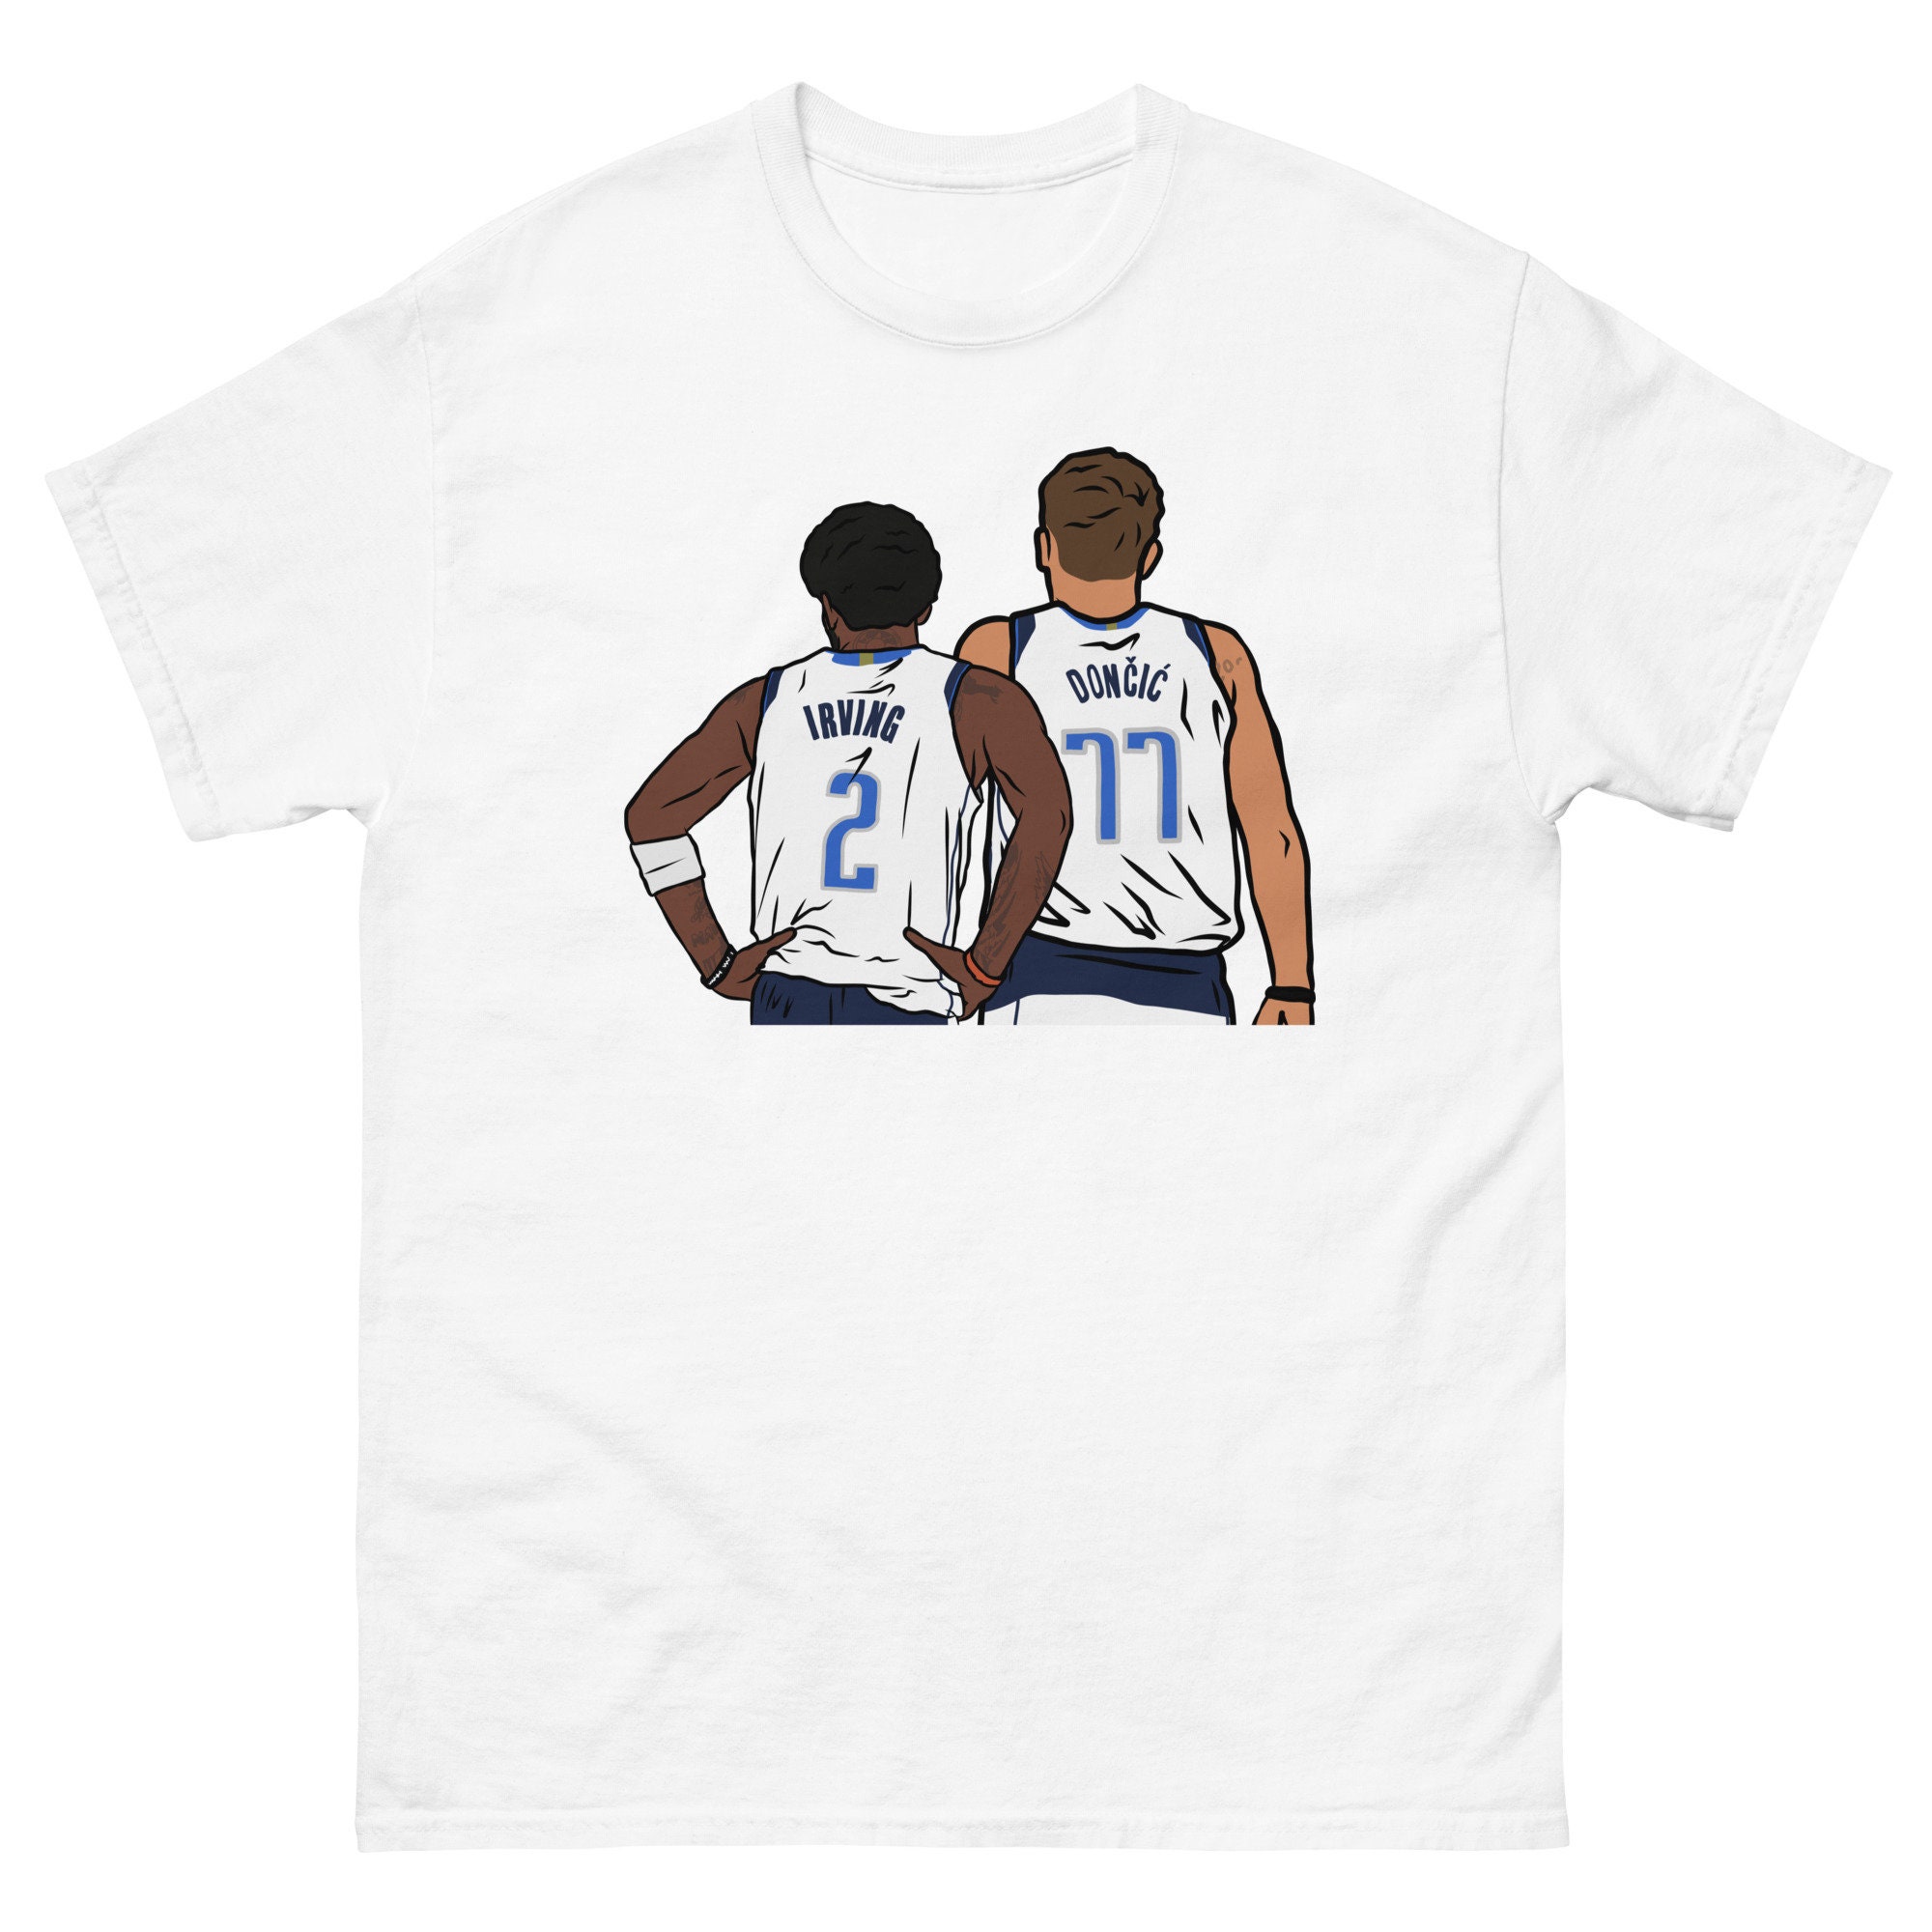 Luka Doncic Mirror GOAT Active T-Shirt for Sale by RatTrapTees